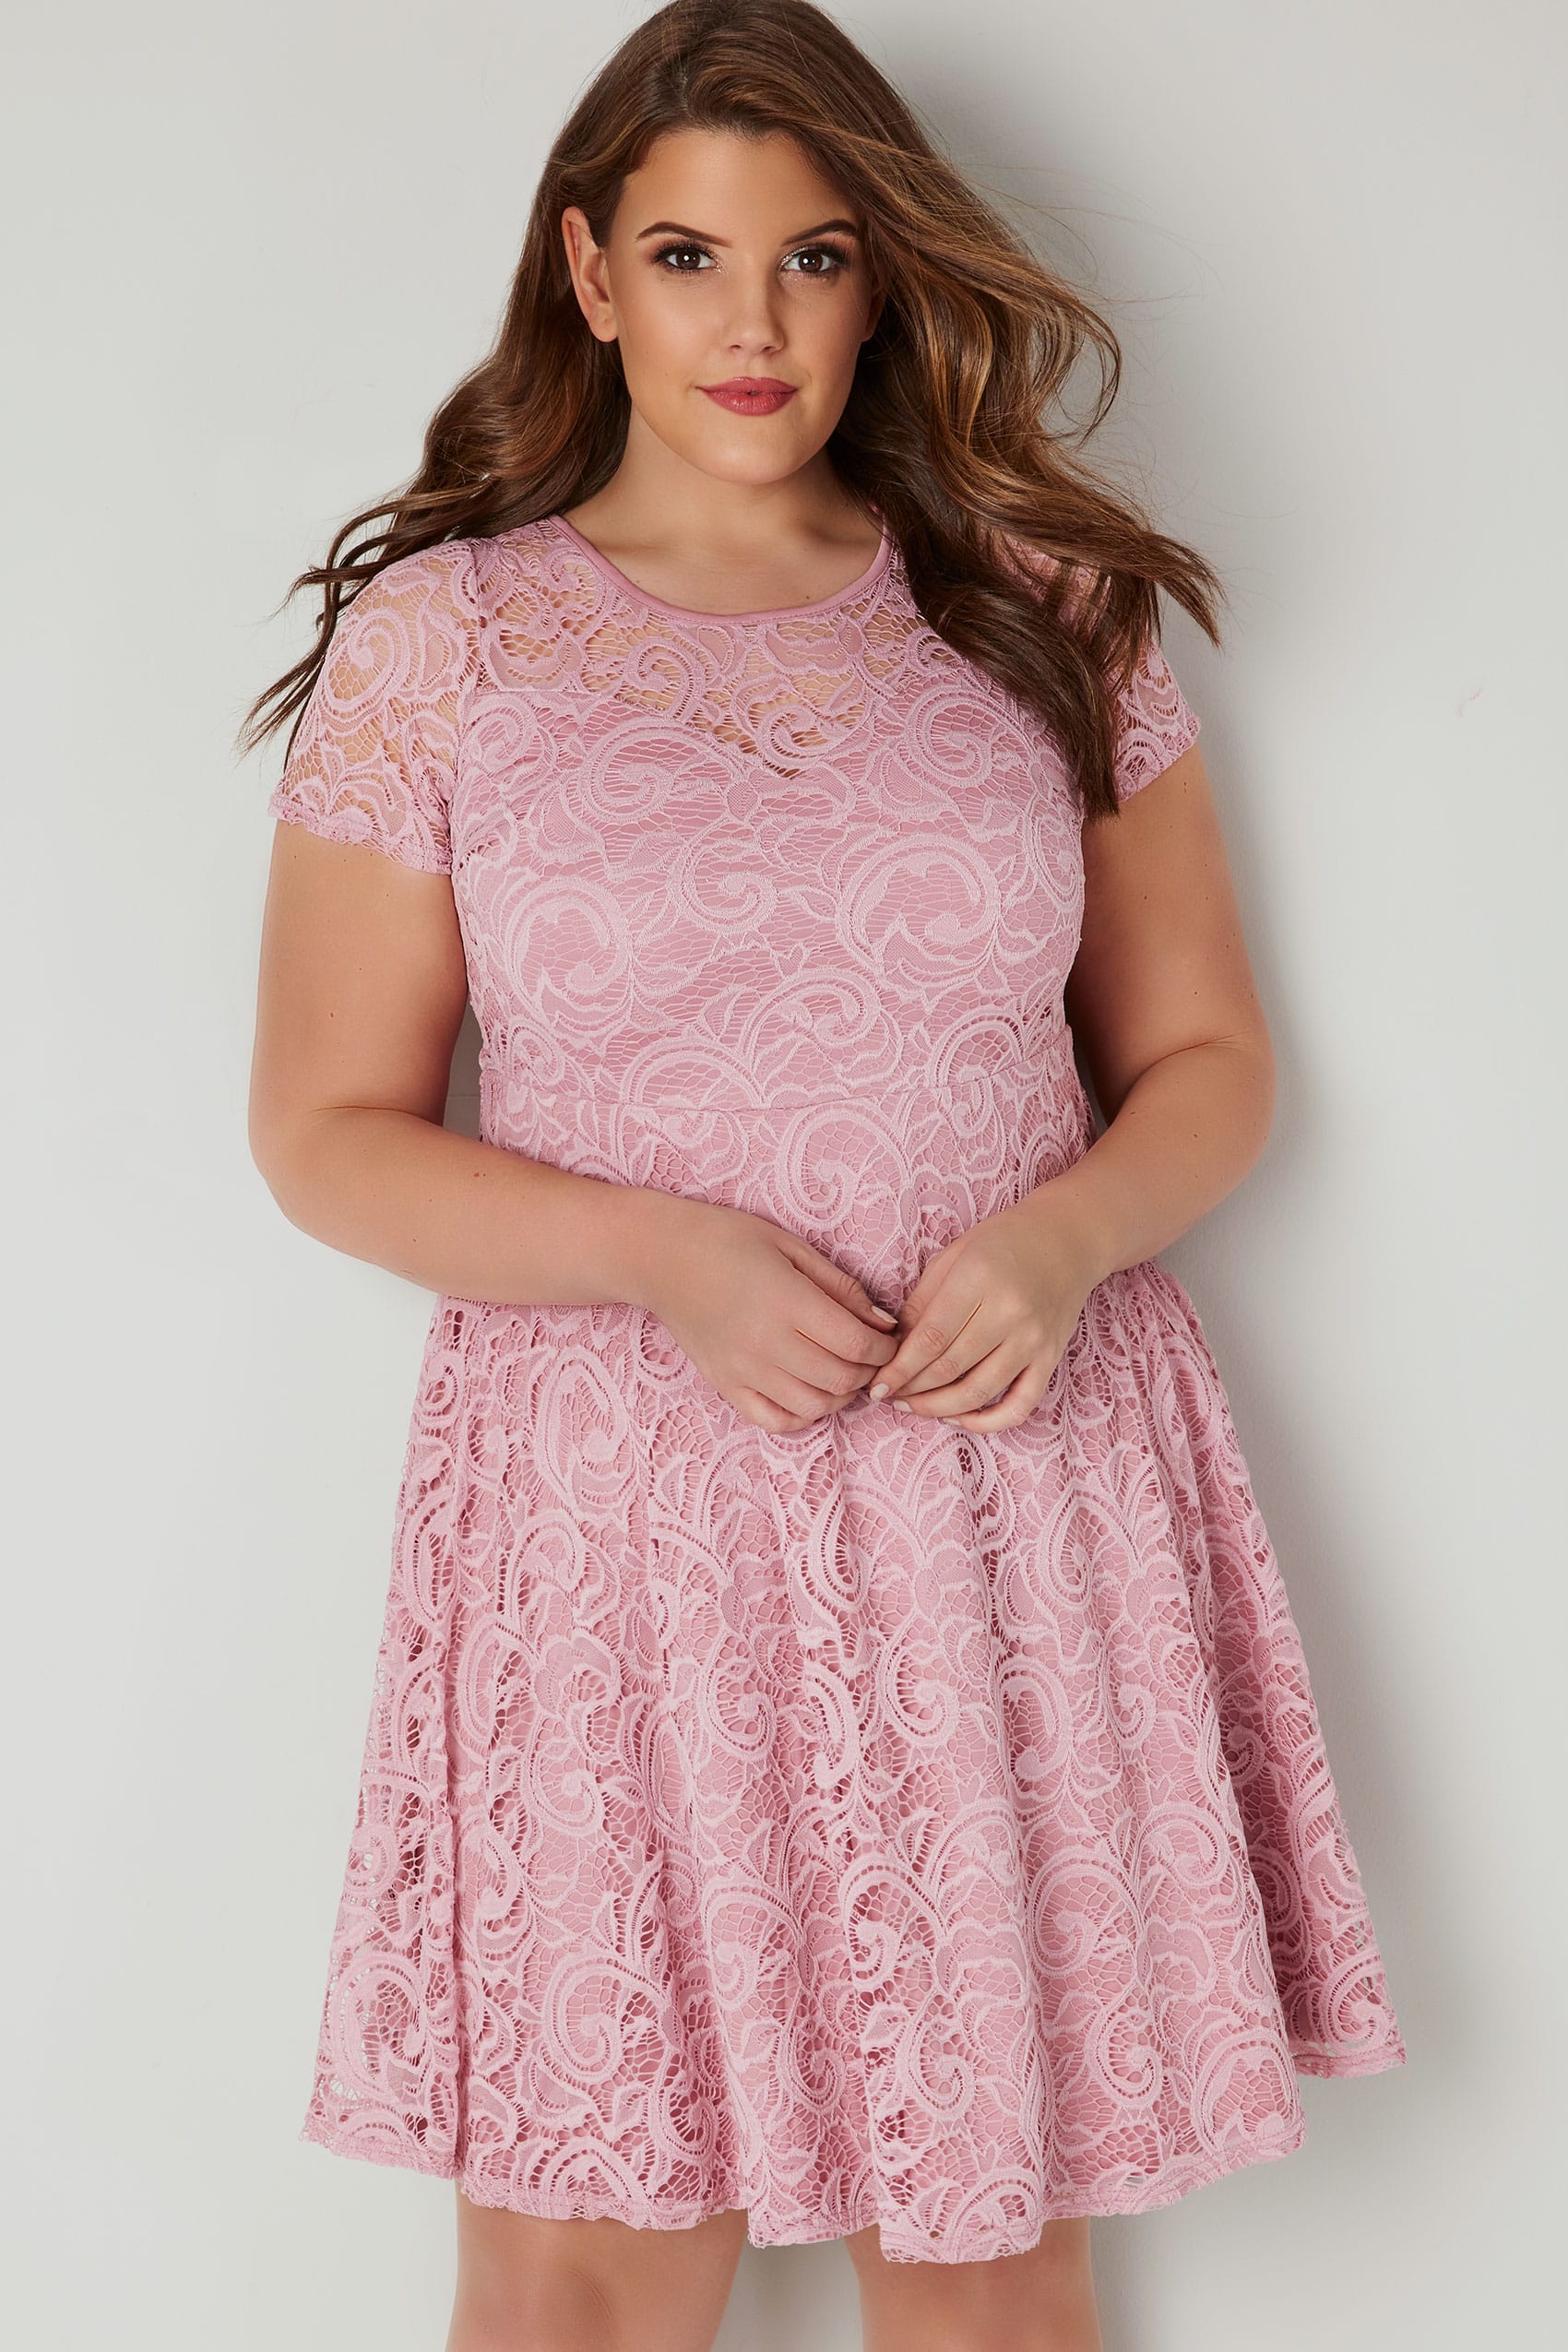 Pink Lace Skater Dress With Sweetheart Bust, plus size 16 to 36 1